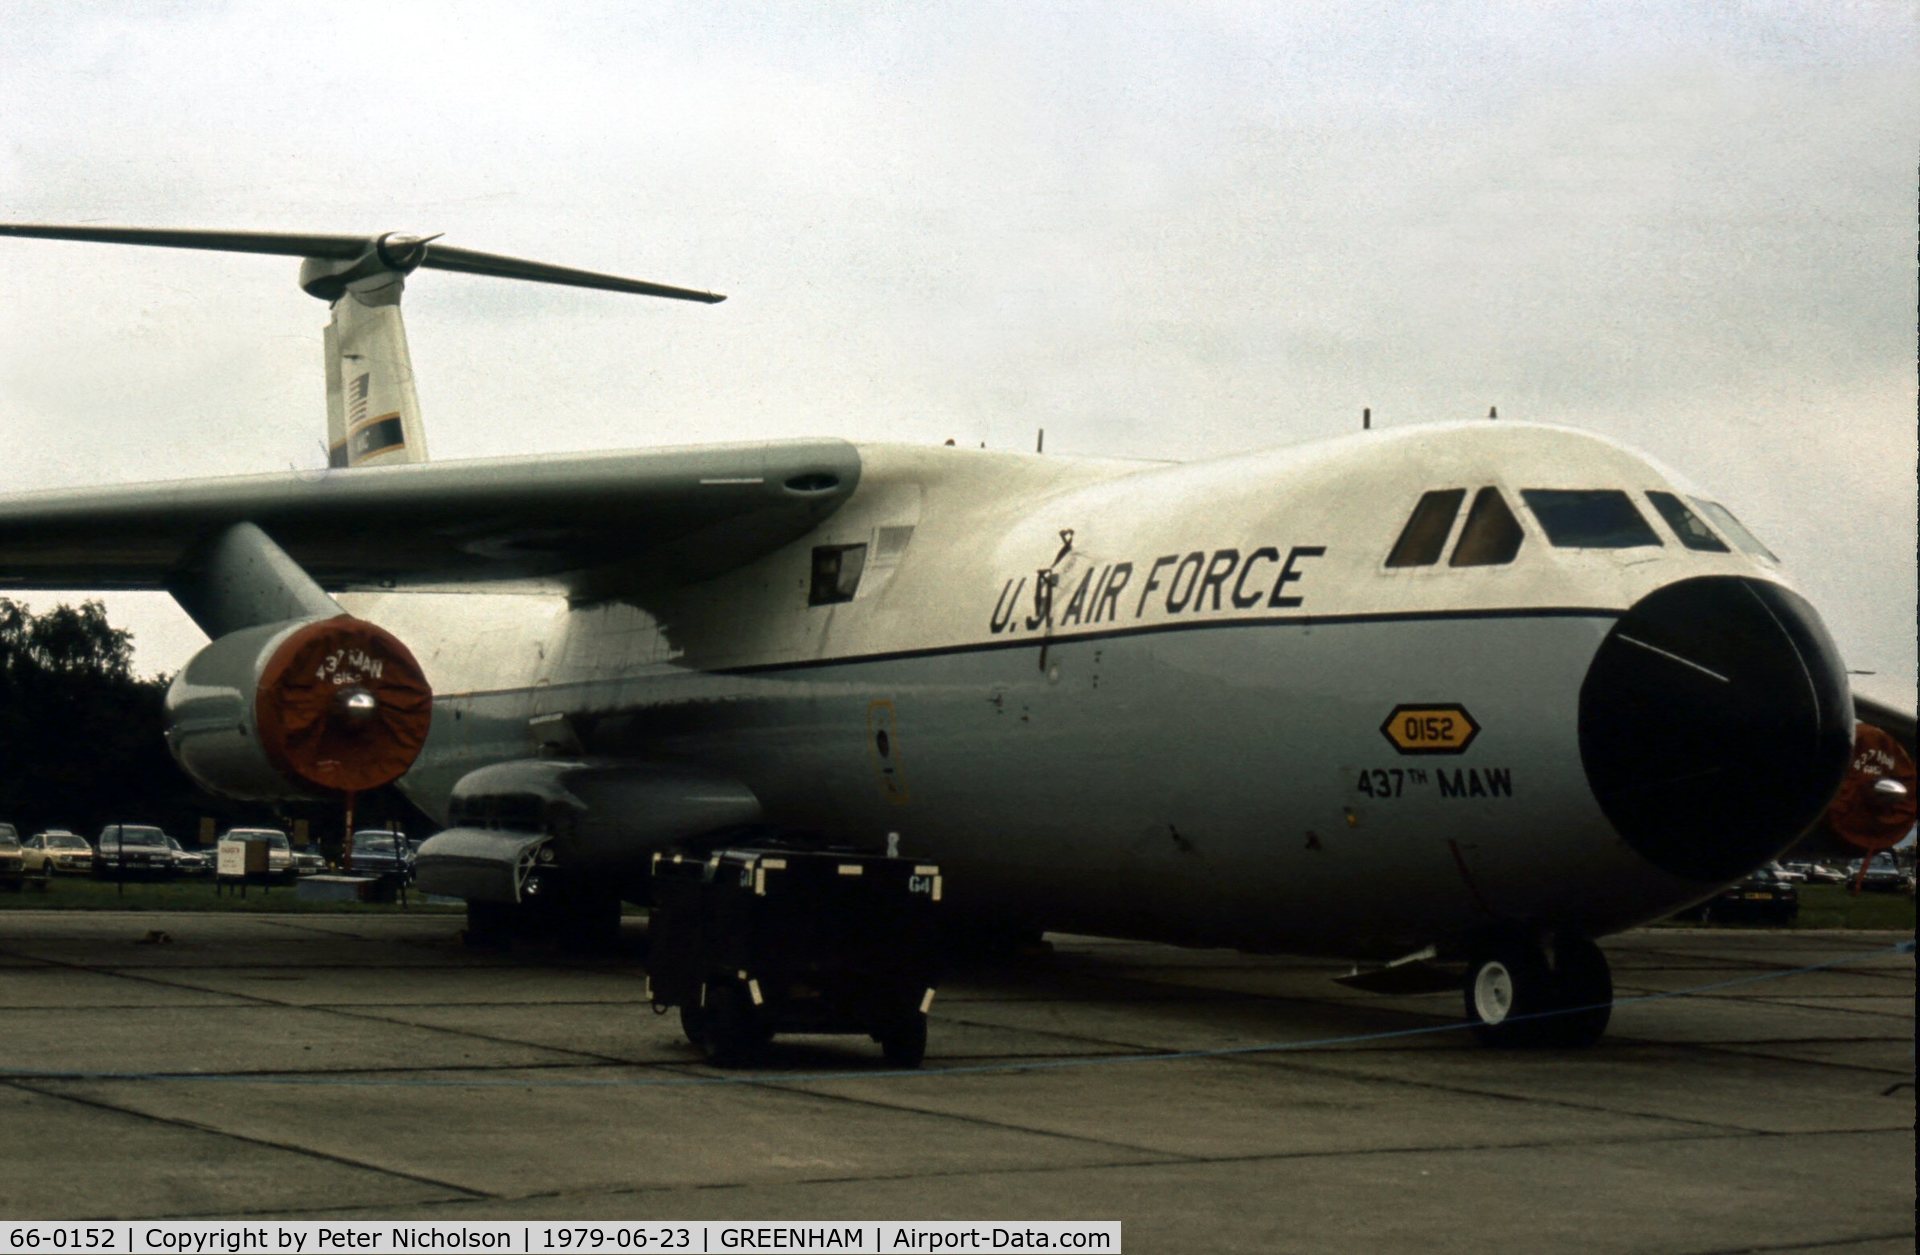 66-0152, 1966 Lockheed C-141A Starlifter C/N 300-6178, C-141A Starlifter of 437th Military Airlift Wing at Charleston AFB at the 1979 Intnl Air Tattoo at RAF Greenham Common.